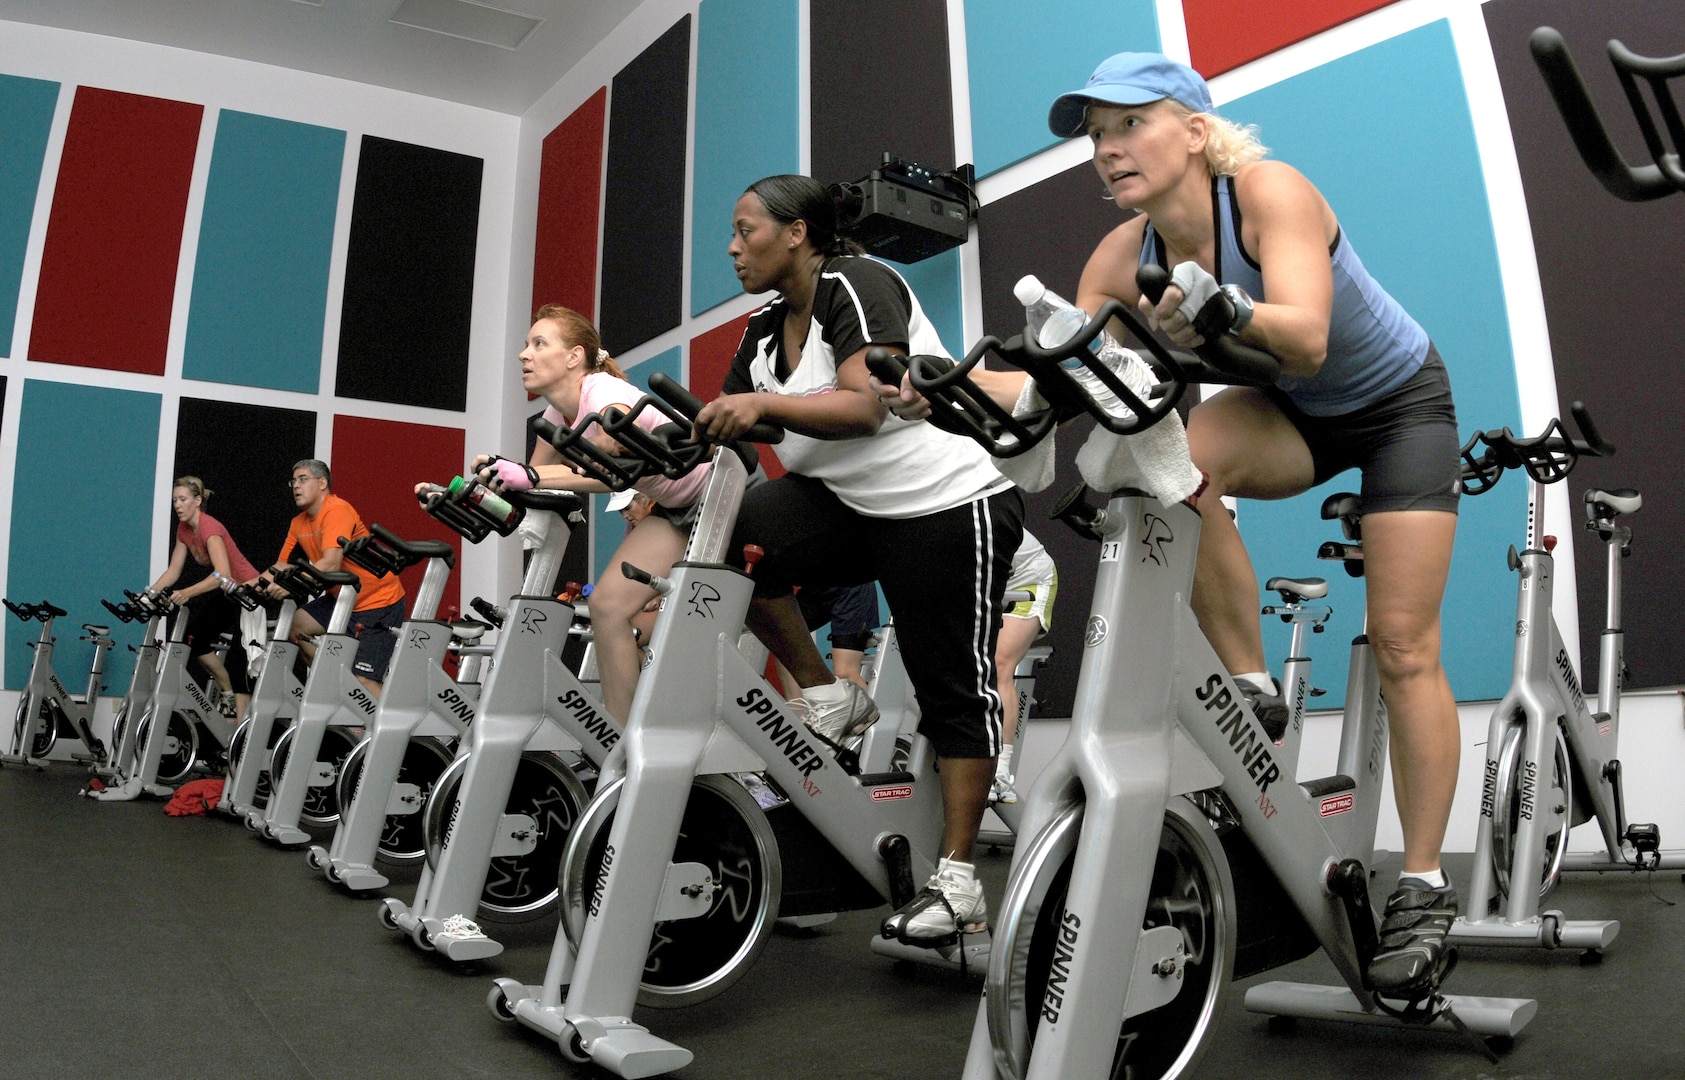 Cycle members go through the motions of a 45-minute spinning class, offered six times a week at Rambler Fitness Center Sept. 15. (U.S. Air Force photo by Rich McFadden)